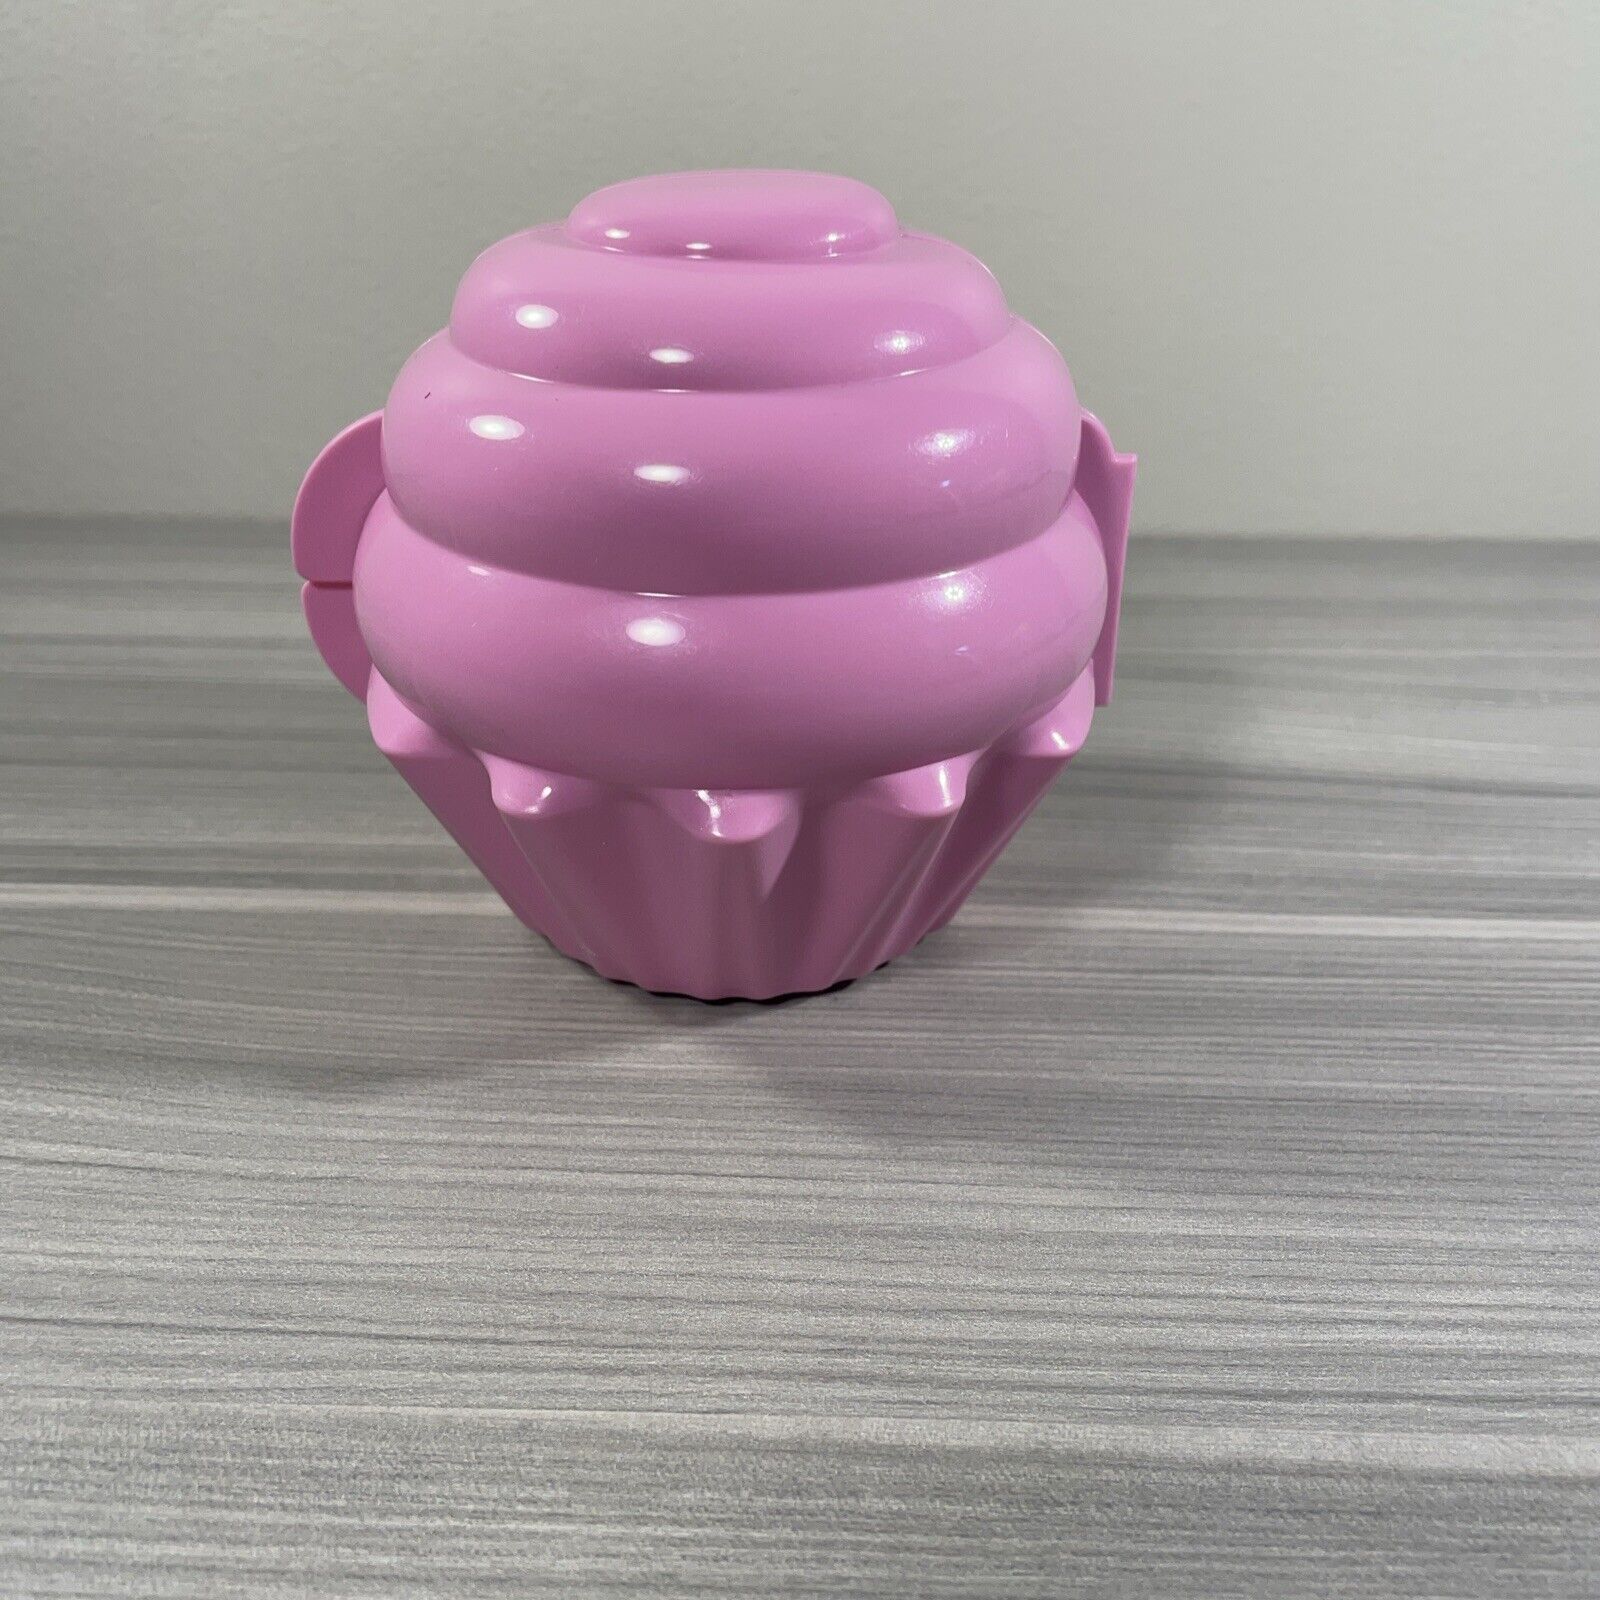 New Tuppetware Pink Cupcake Muffin Keeper Holder Forget-me-not Container